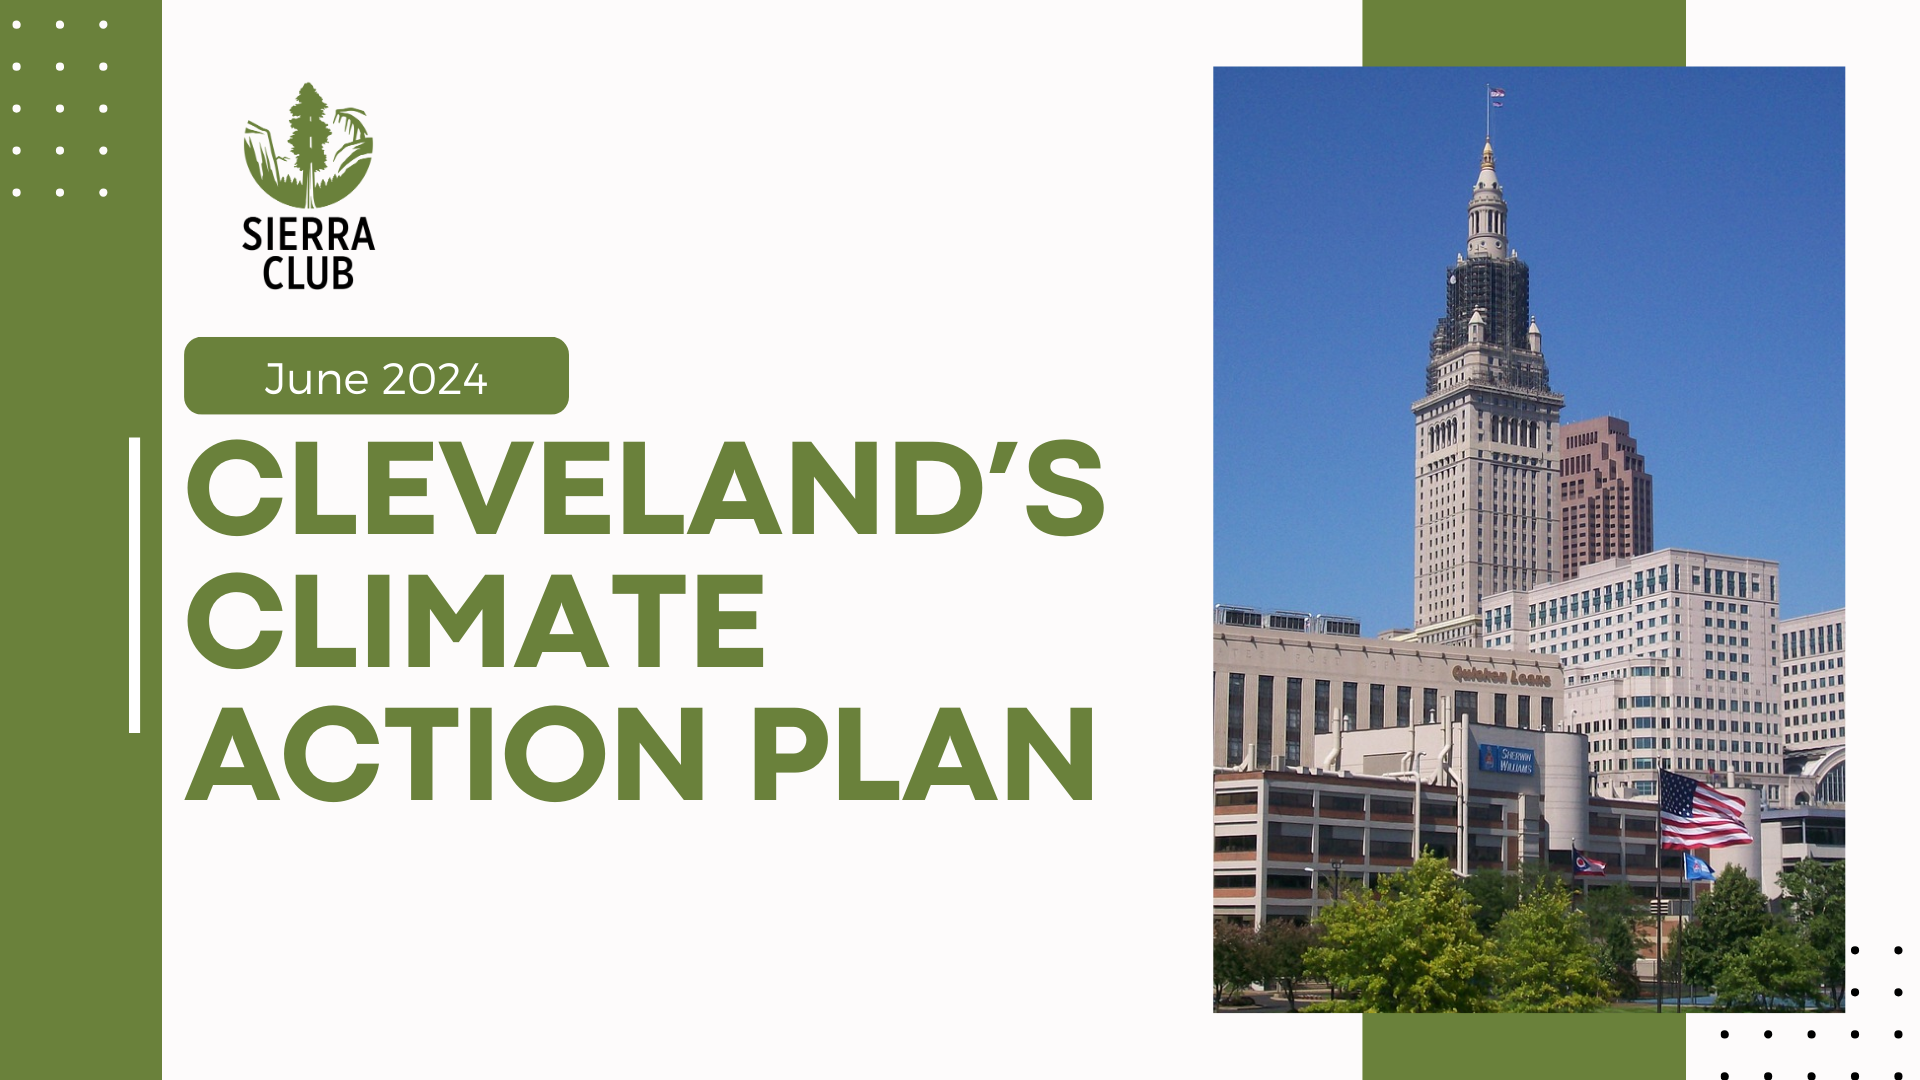 Pictured: Small picture of Cleveland accompanied by the text reading: Cleveland's Climate Action Plan